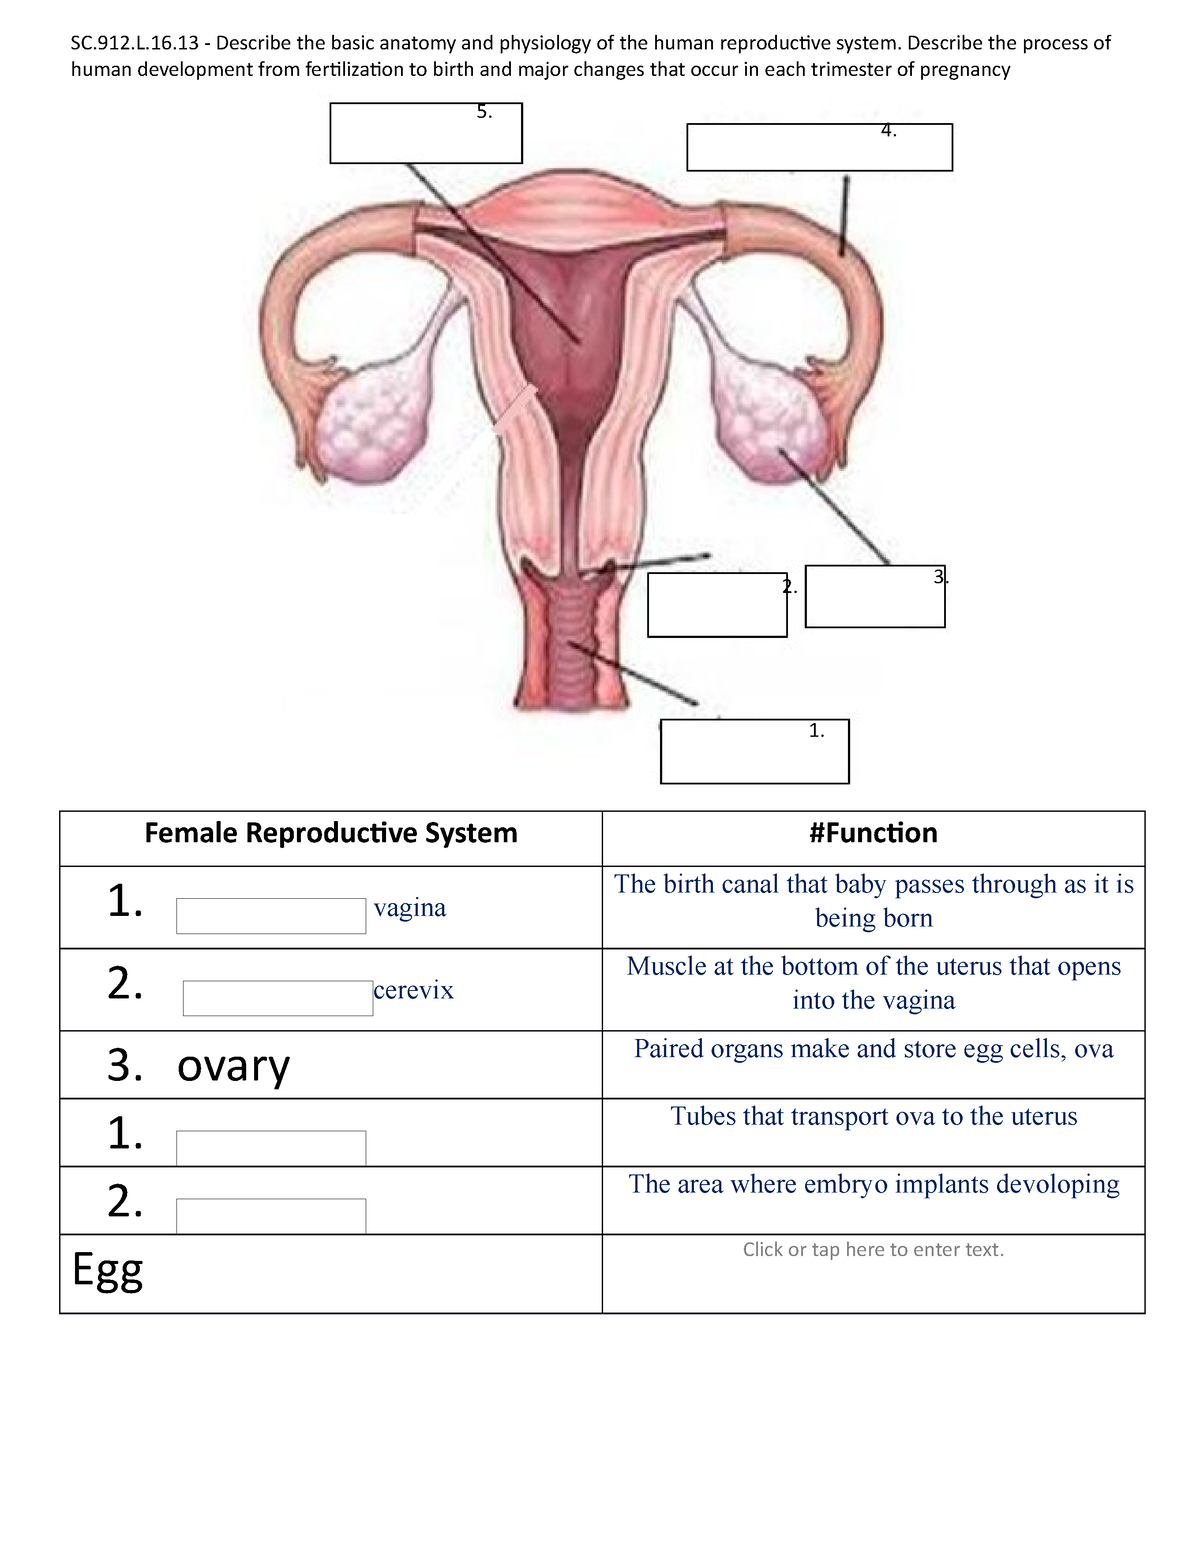 Female Reproductive System Kb SC L Describe The Basic Anatomy And Physiology Of The